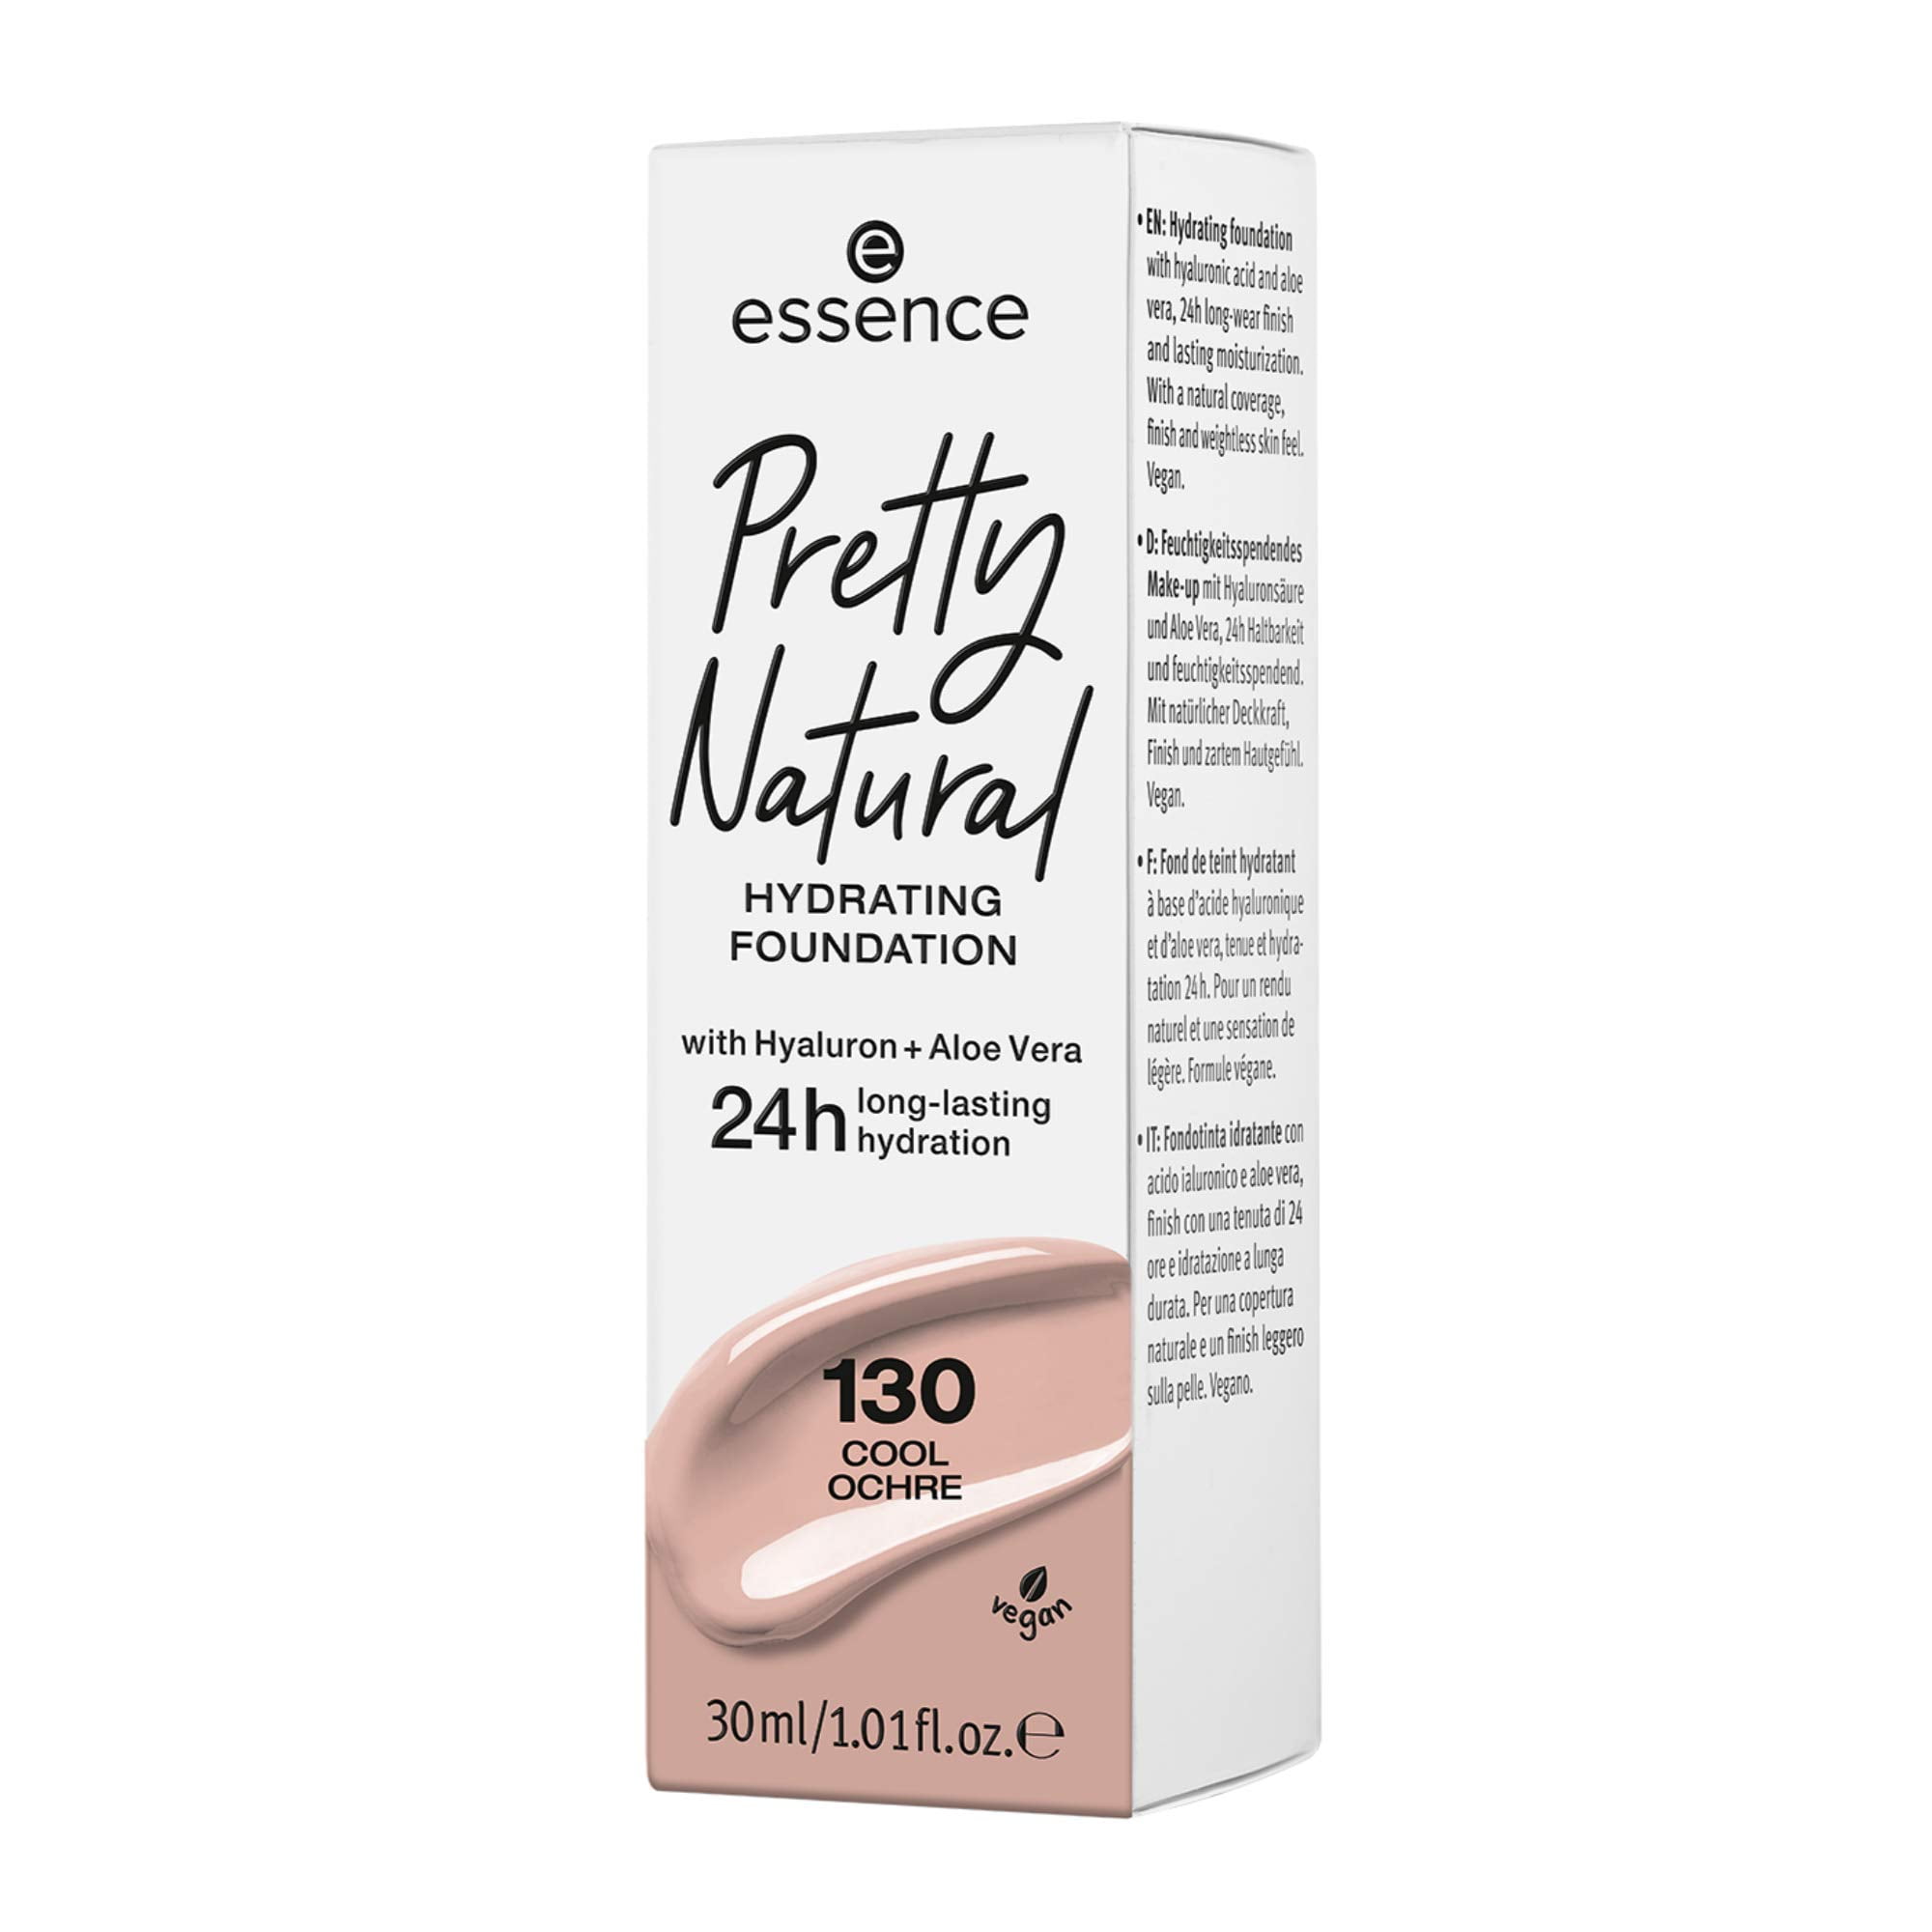 essence Pretty Natural Hydrating Foundation Medium | Buildable Coverage for  a Natural Skin Look Formulated w/ Hyaluronic Acid & Aloe Vera Made w/o  Gluten, Parabens, Oil & Alcohol Vegan & Cruelty Free -